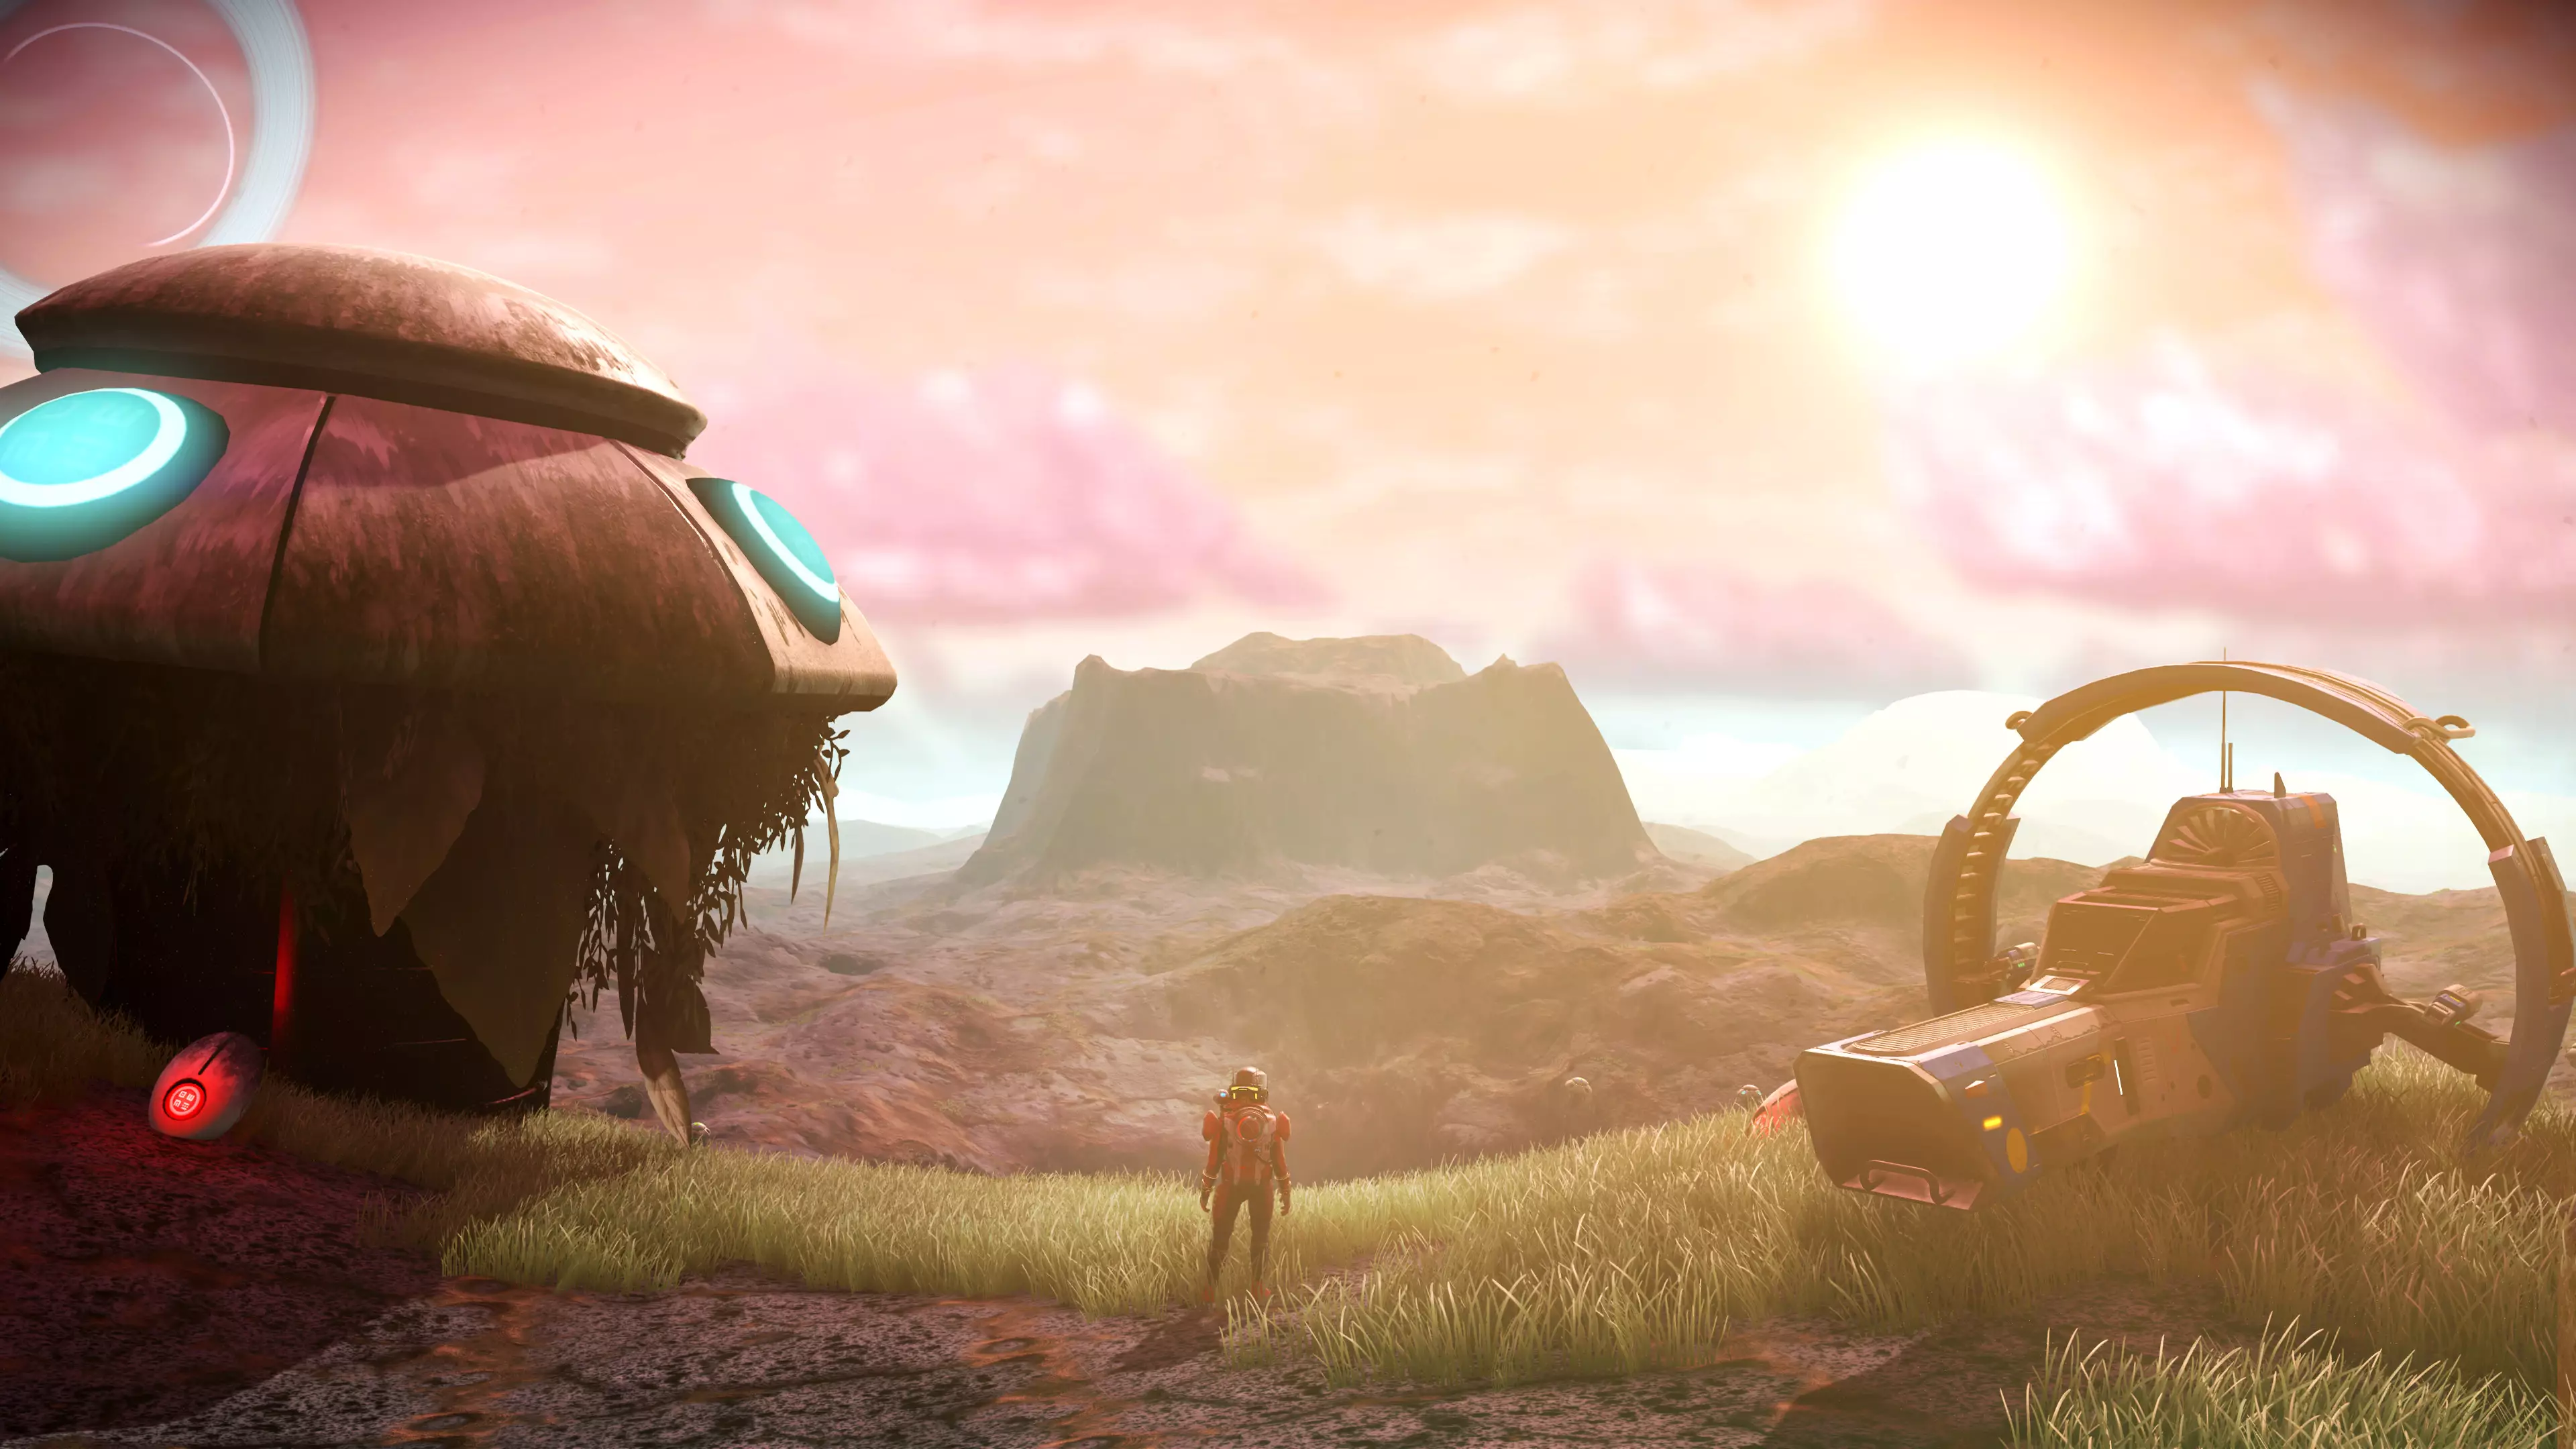 No Man's Sky's pre-release hype made its modest, features-lacking launch feel like a huge disappointment /